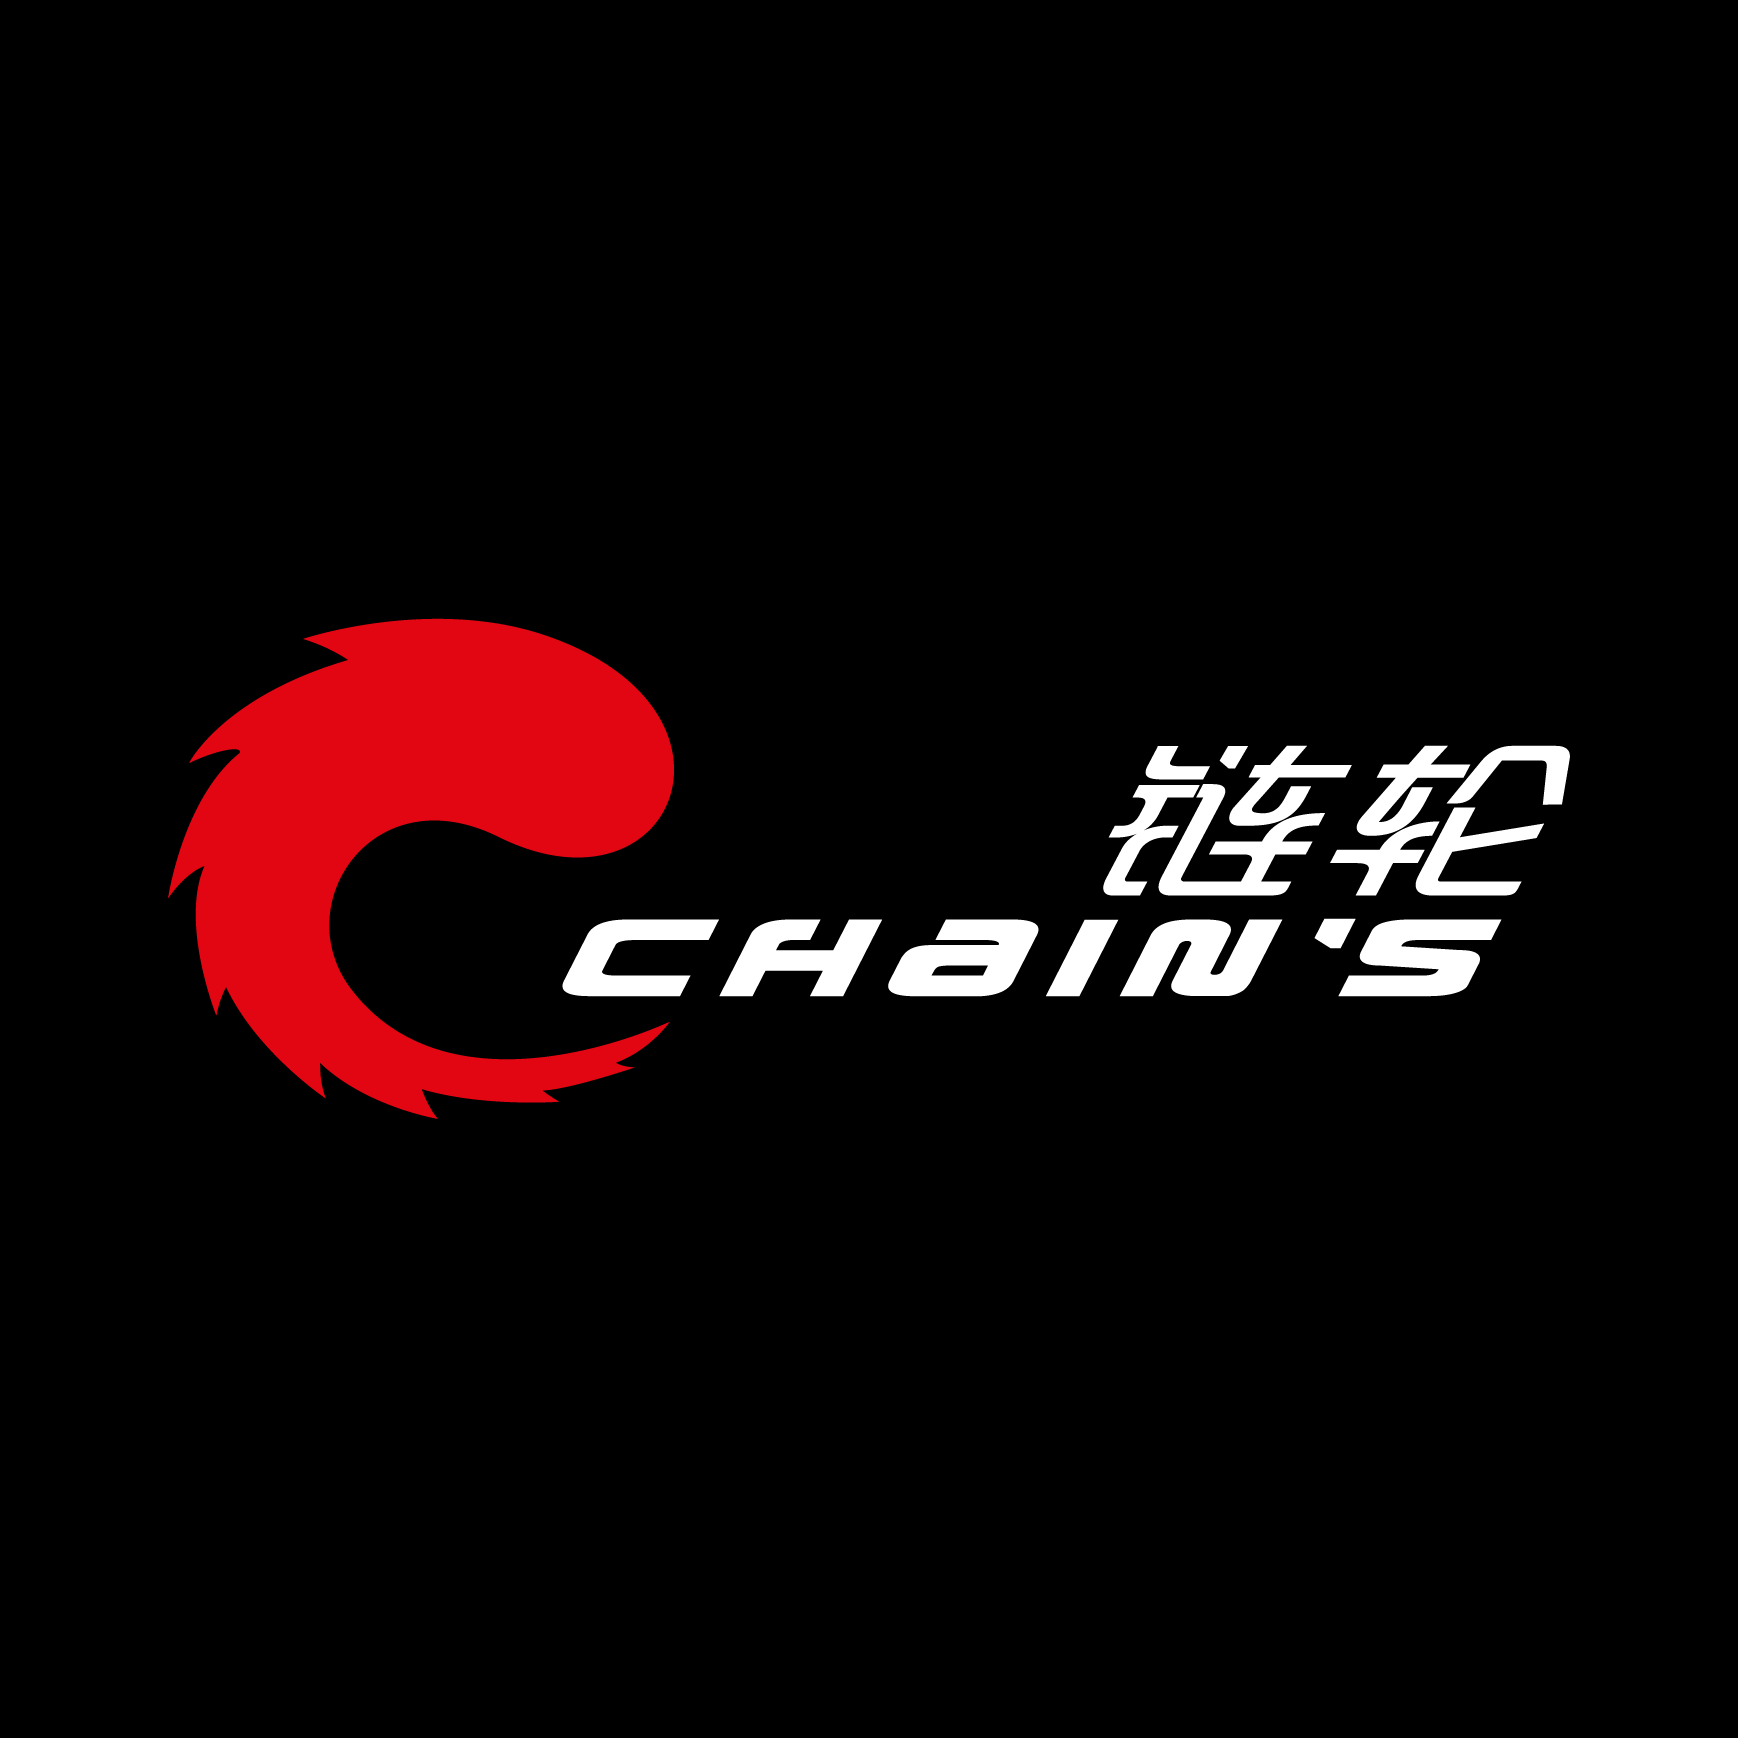 Club Image for CHAINS